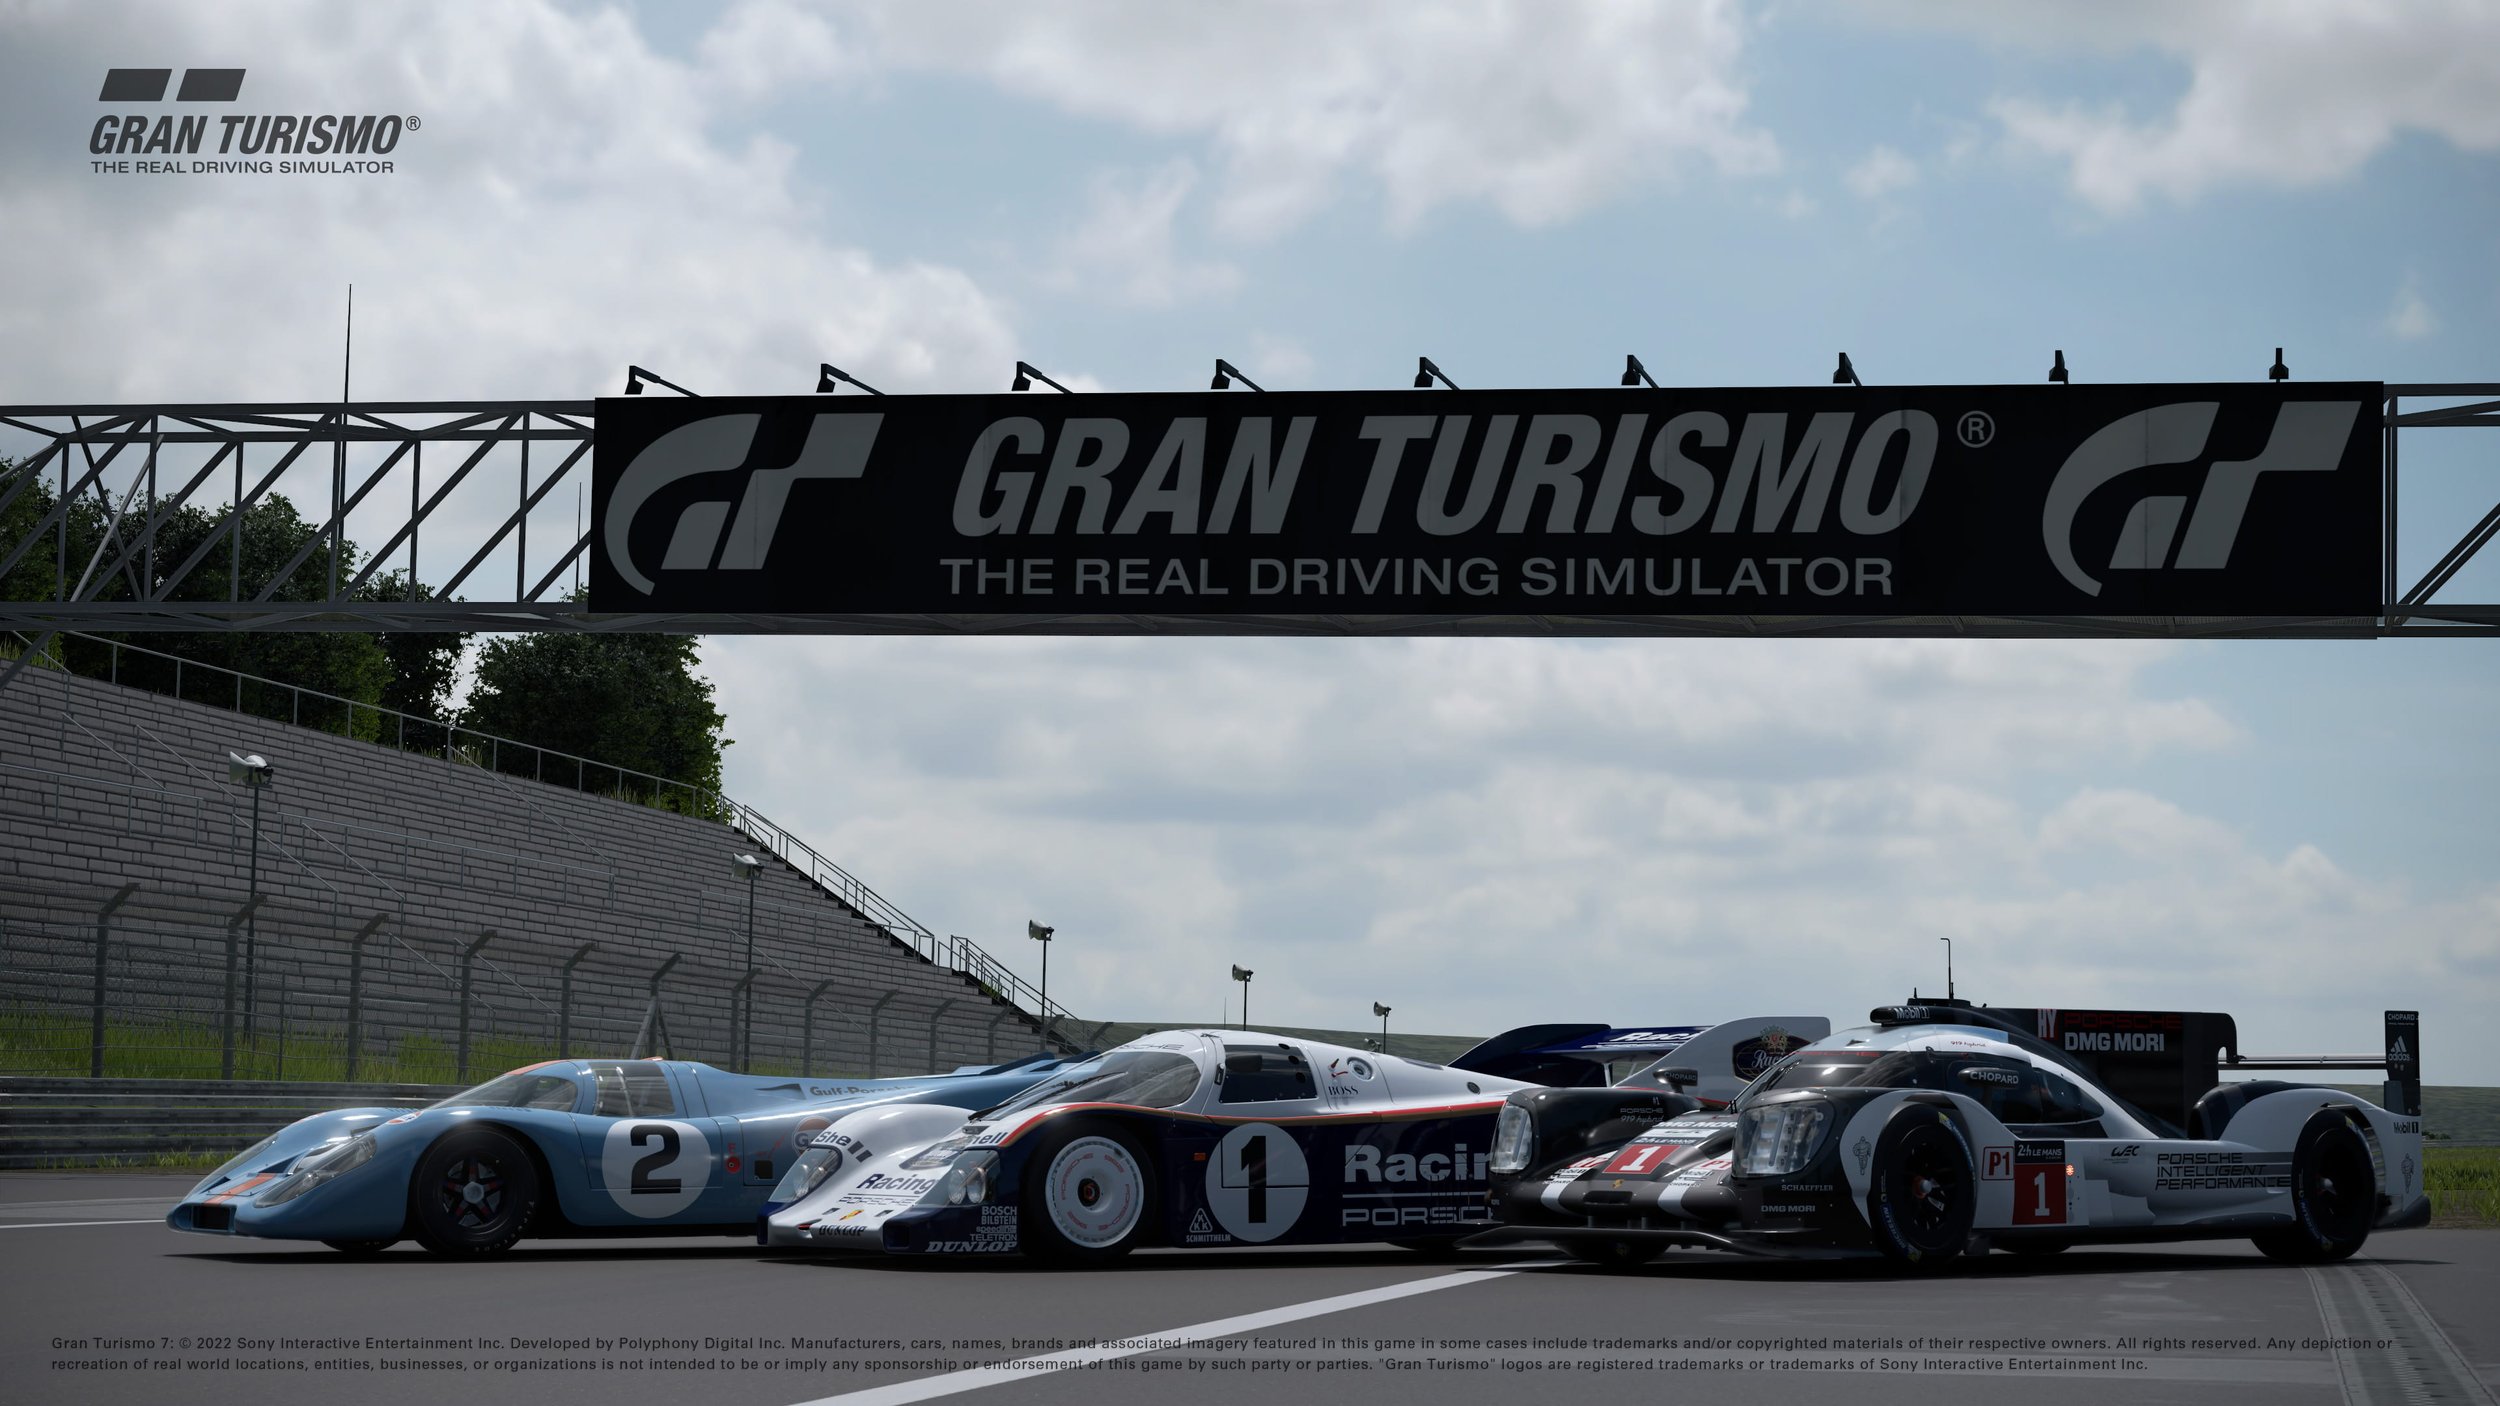 Gran Turismo 7 track list, All iconic races and circuits confirmed